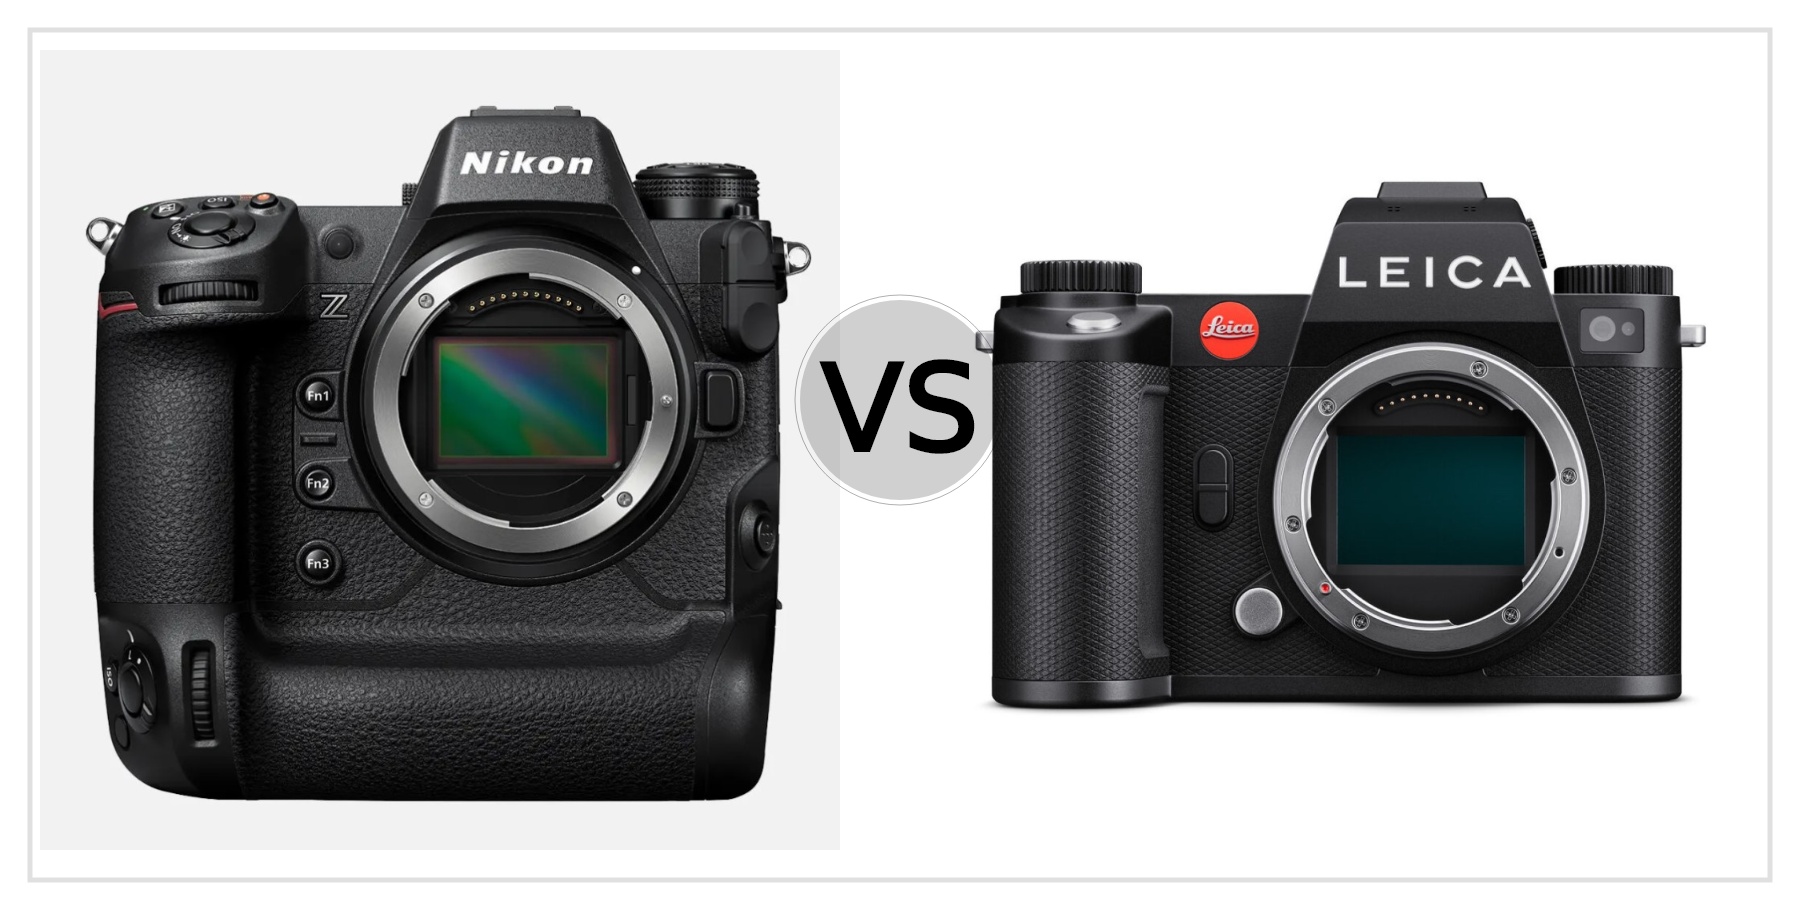 Compare Nikon Z9 VS Leica SL3 to see which is better